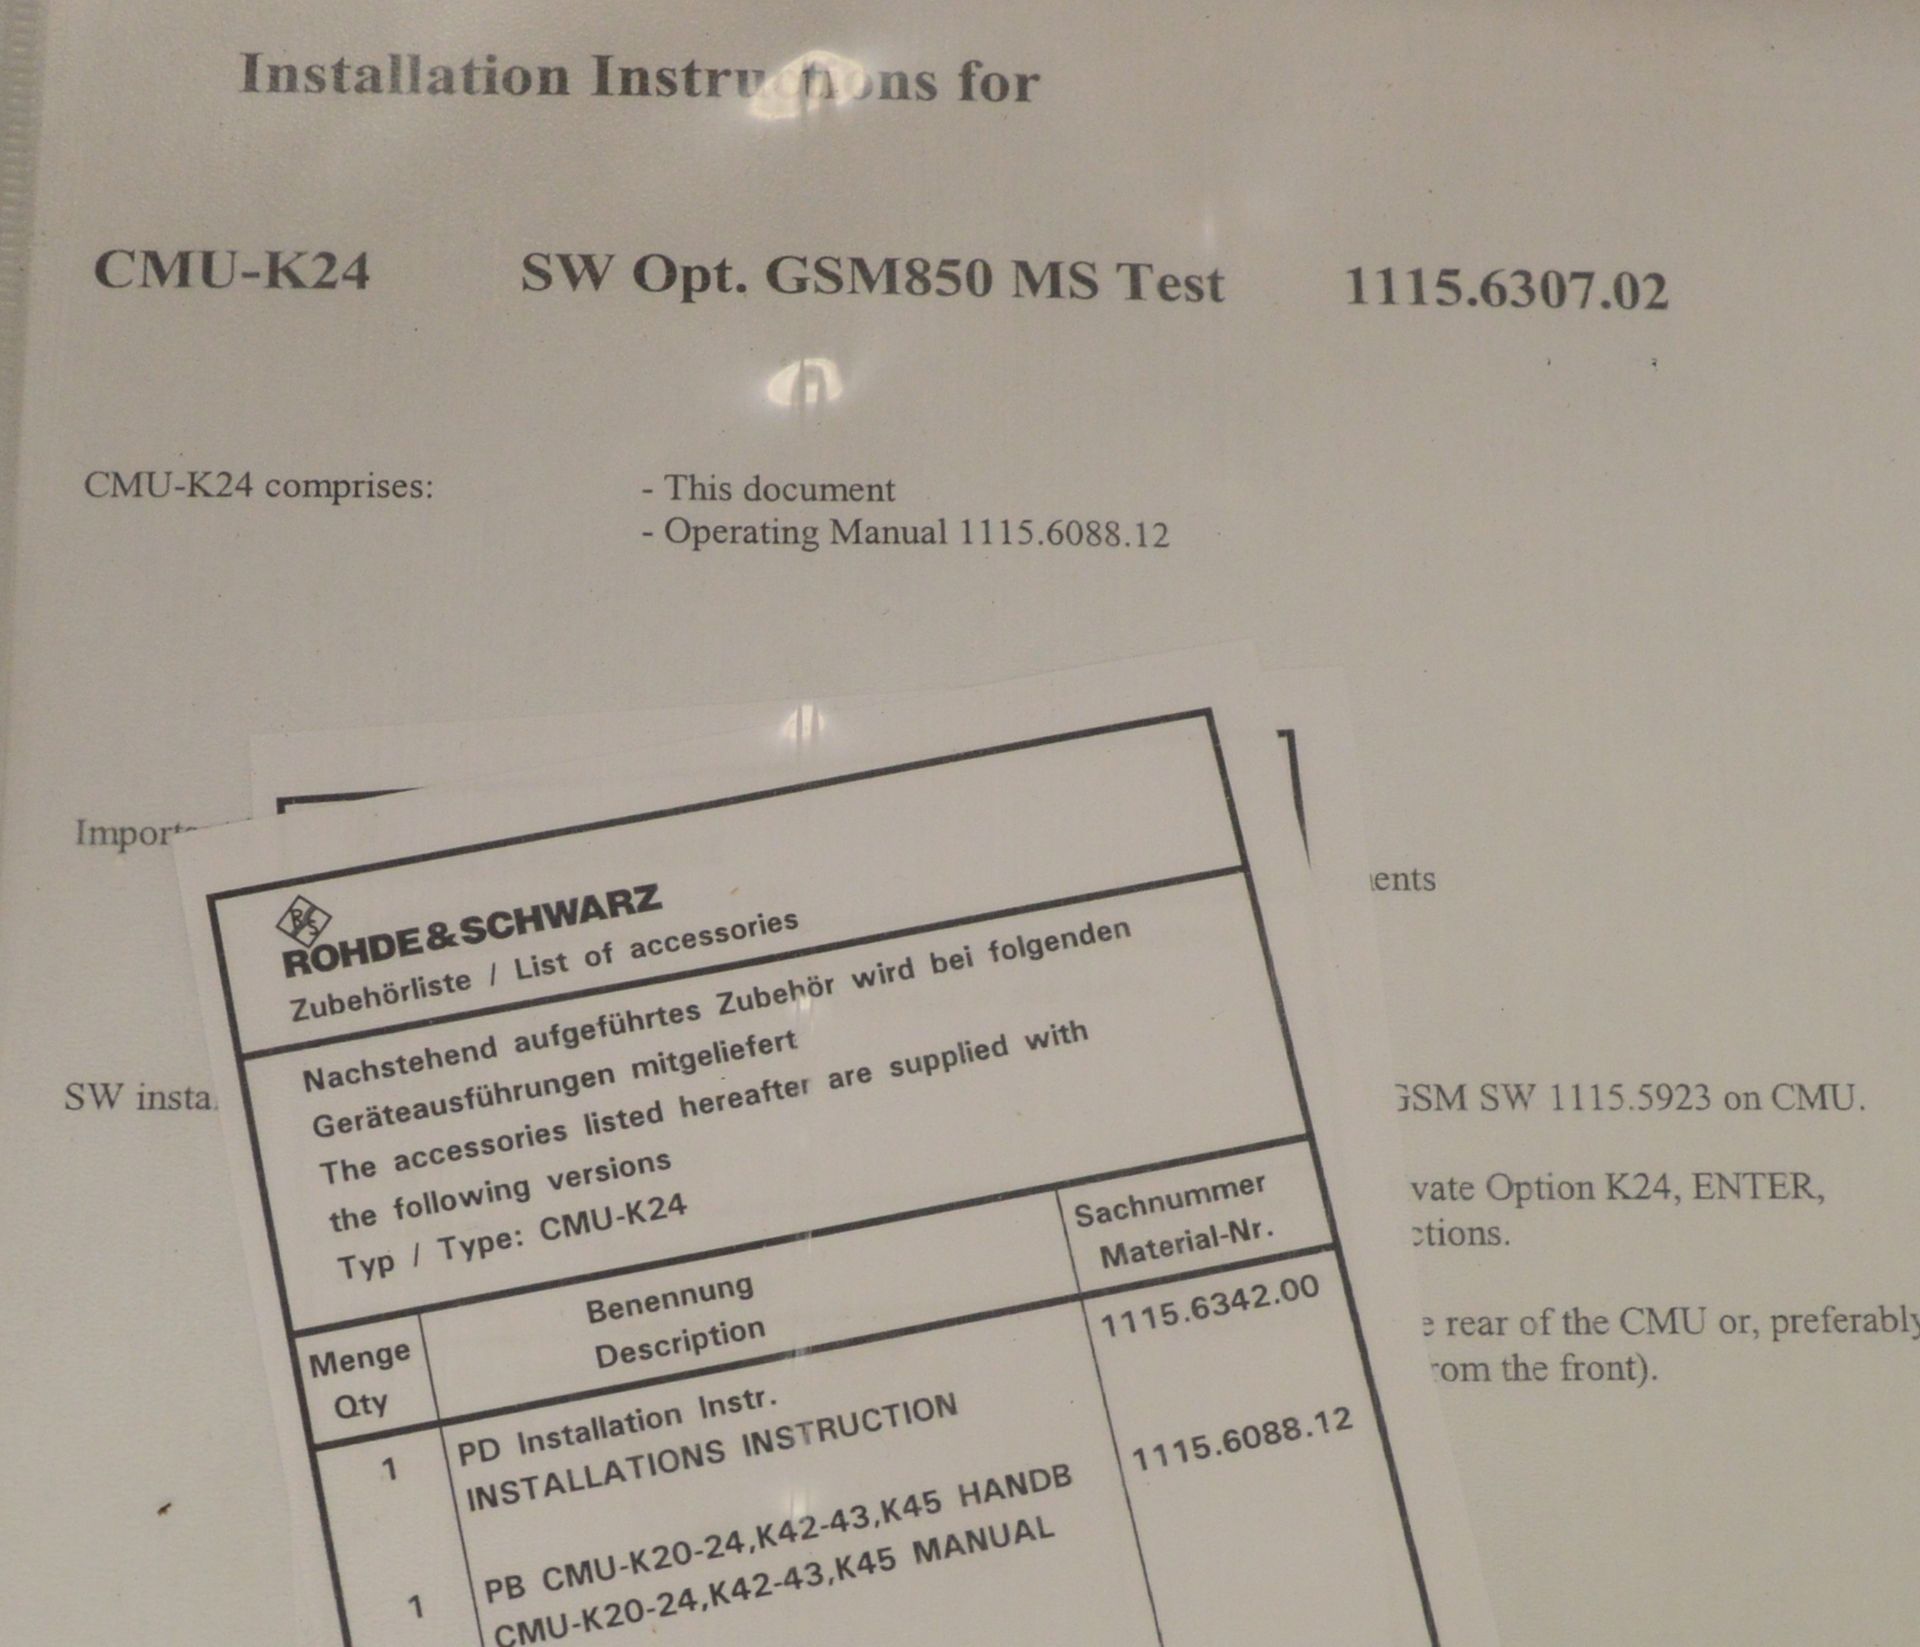 Rohde & Schwarz PD Installation Instructions 1115.6342.00. - Image 2 of 2